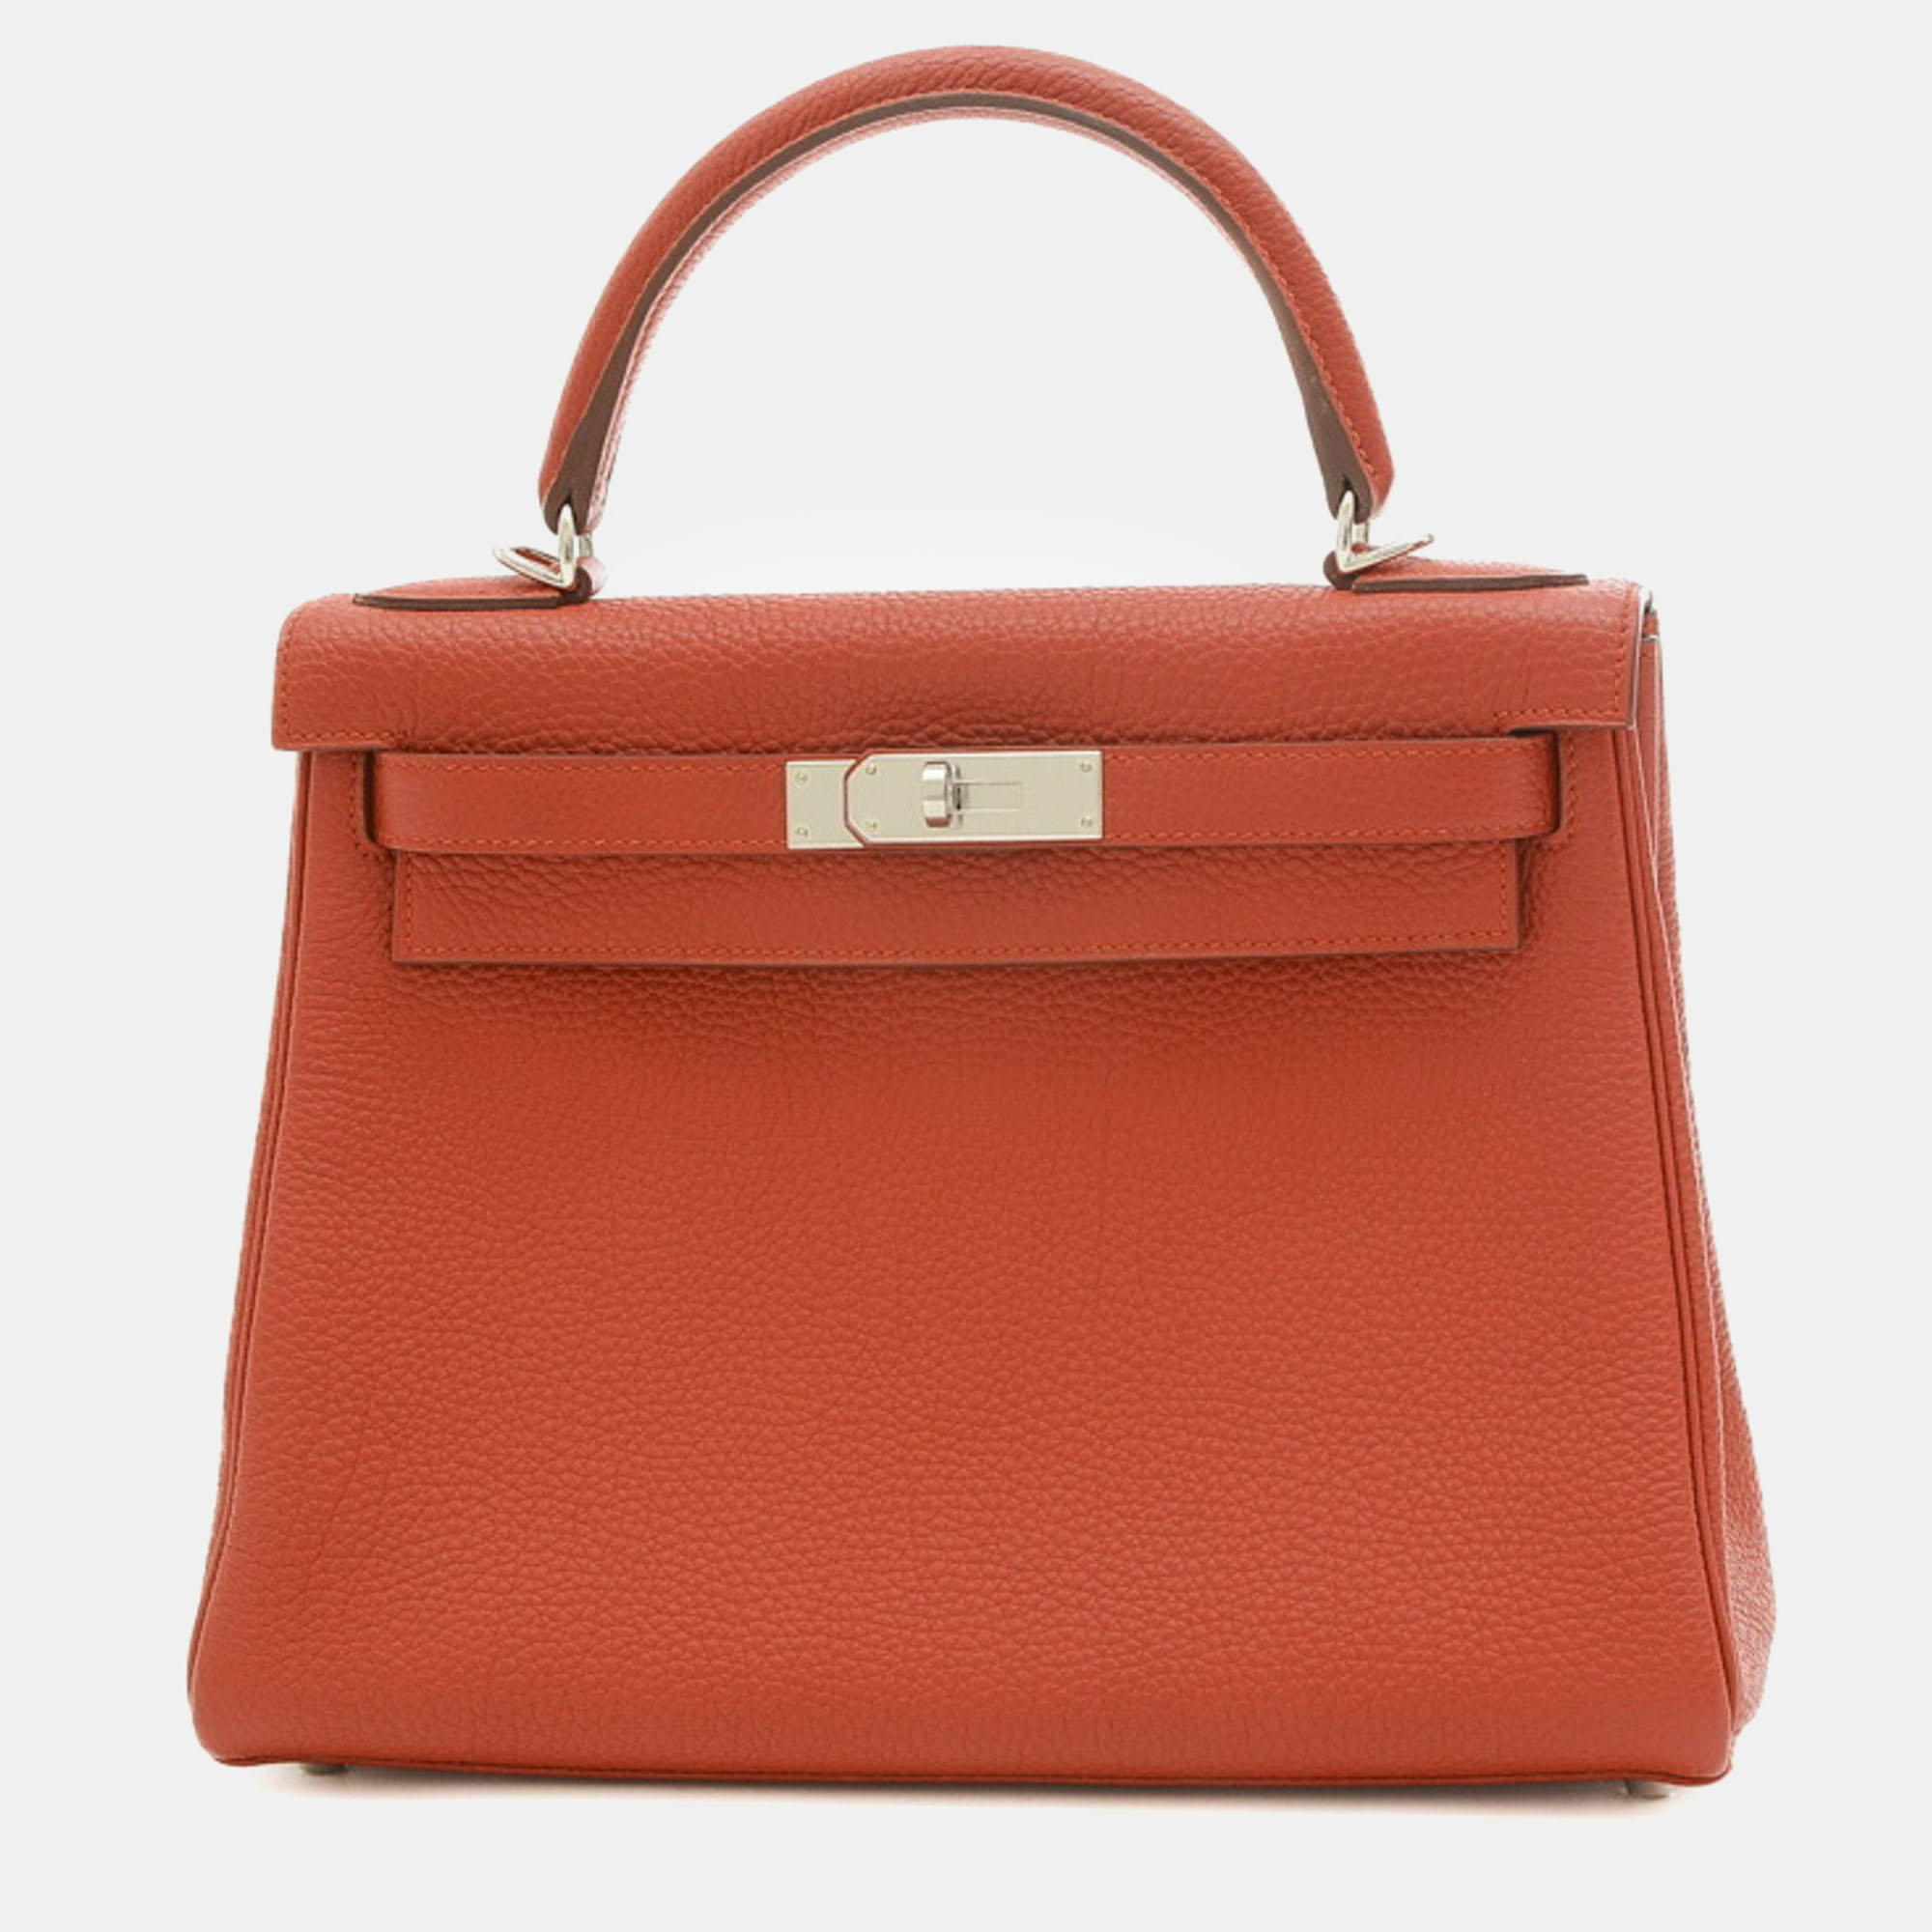 Hermes red togo leather kelly 28 tote bag